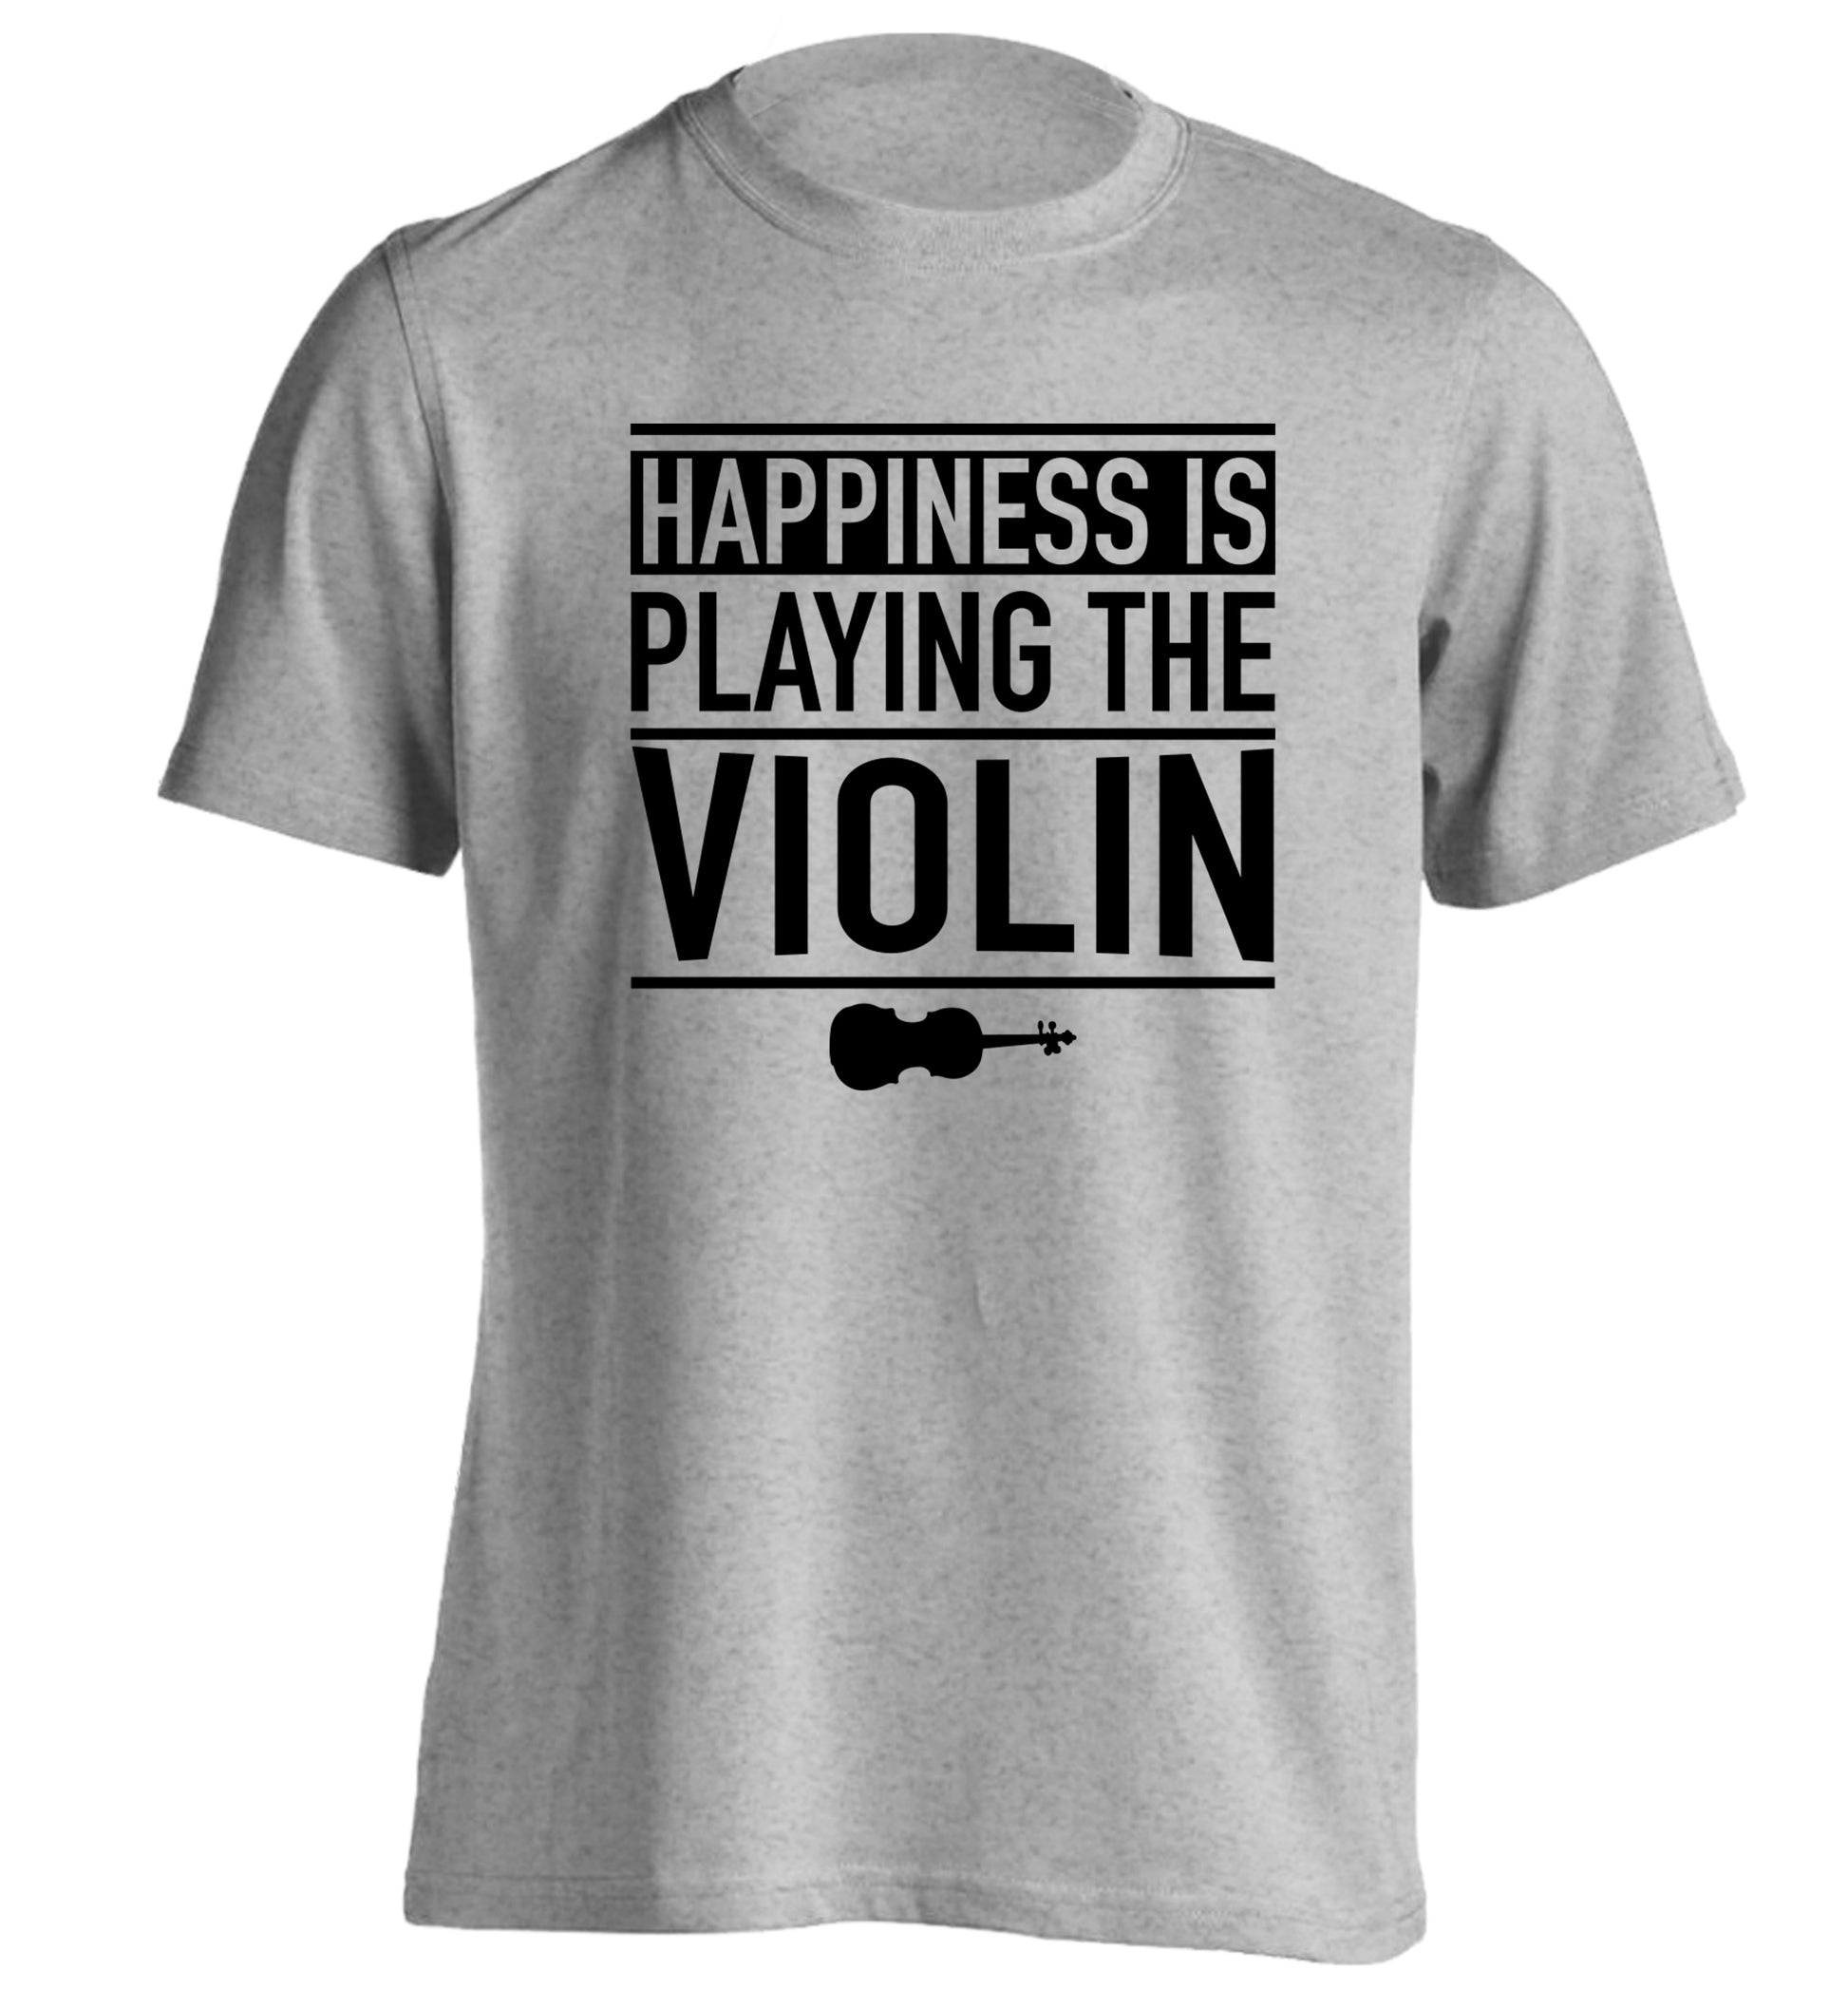 Happiness is playing the violin adults unisex grey Tshirt 2XL